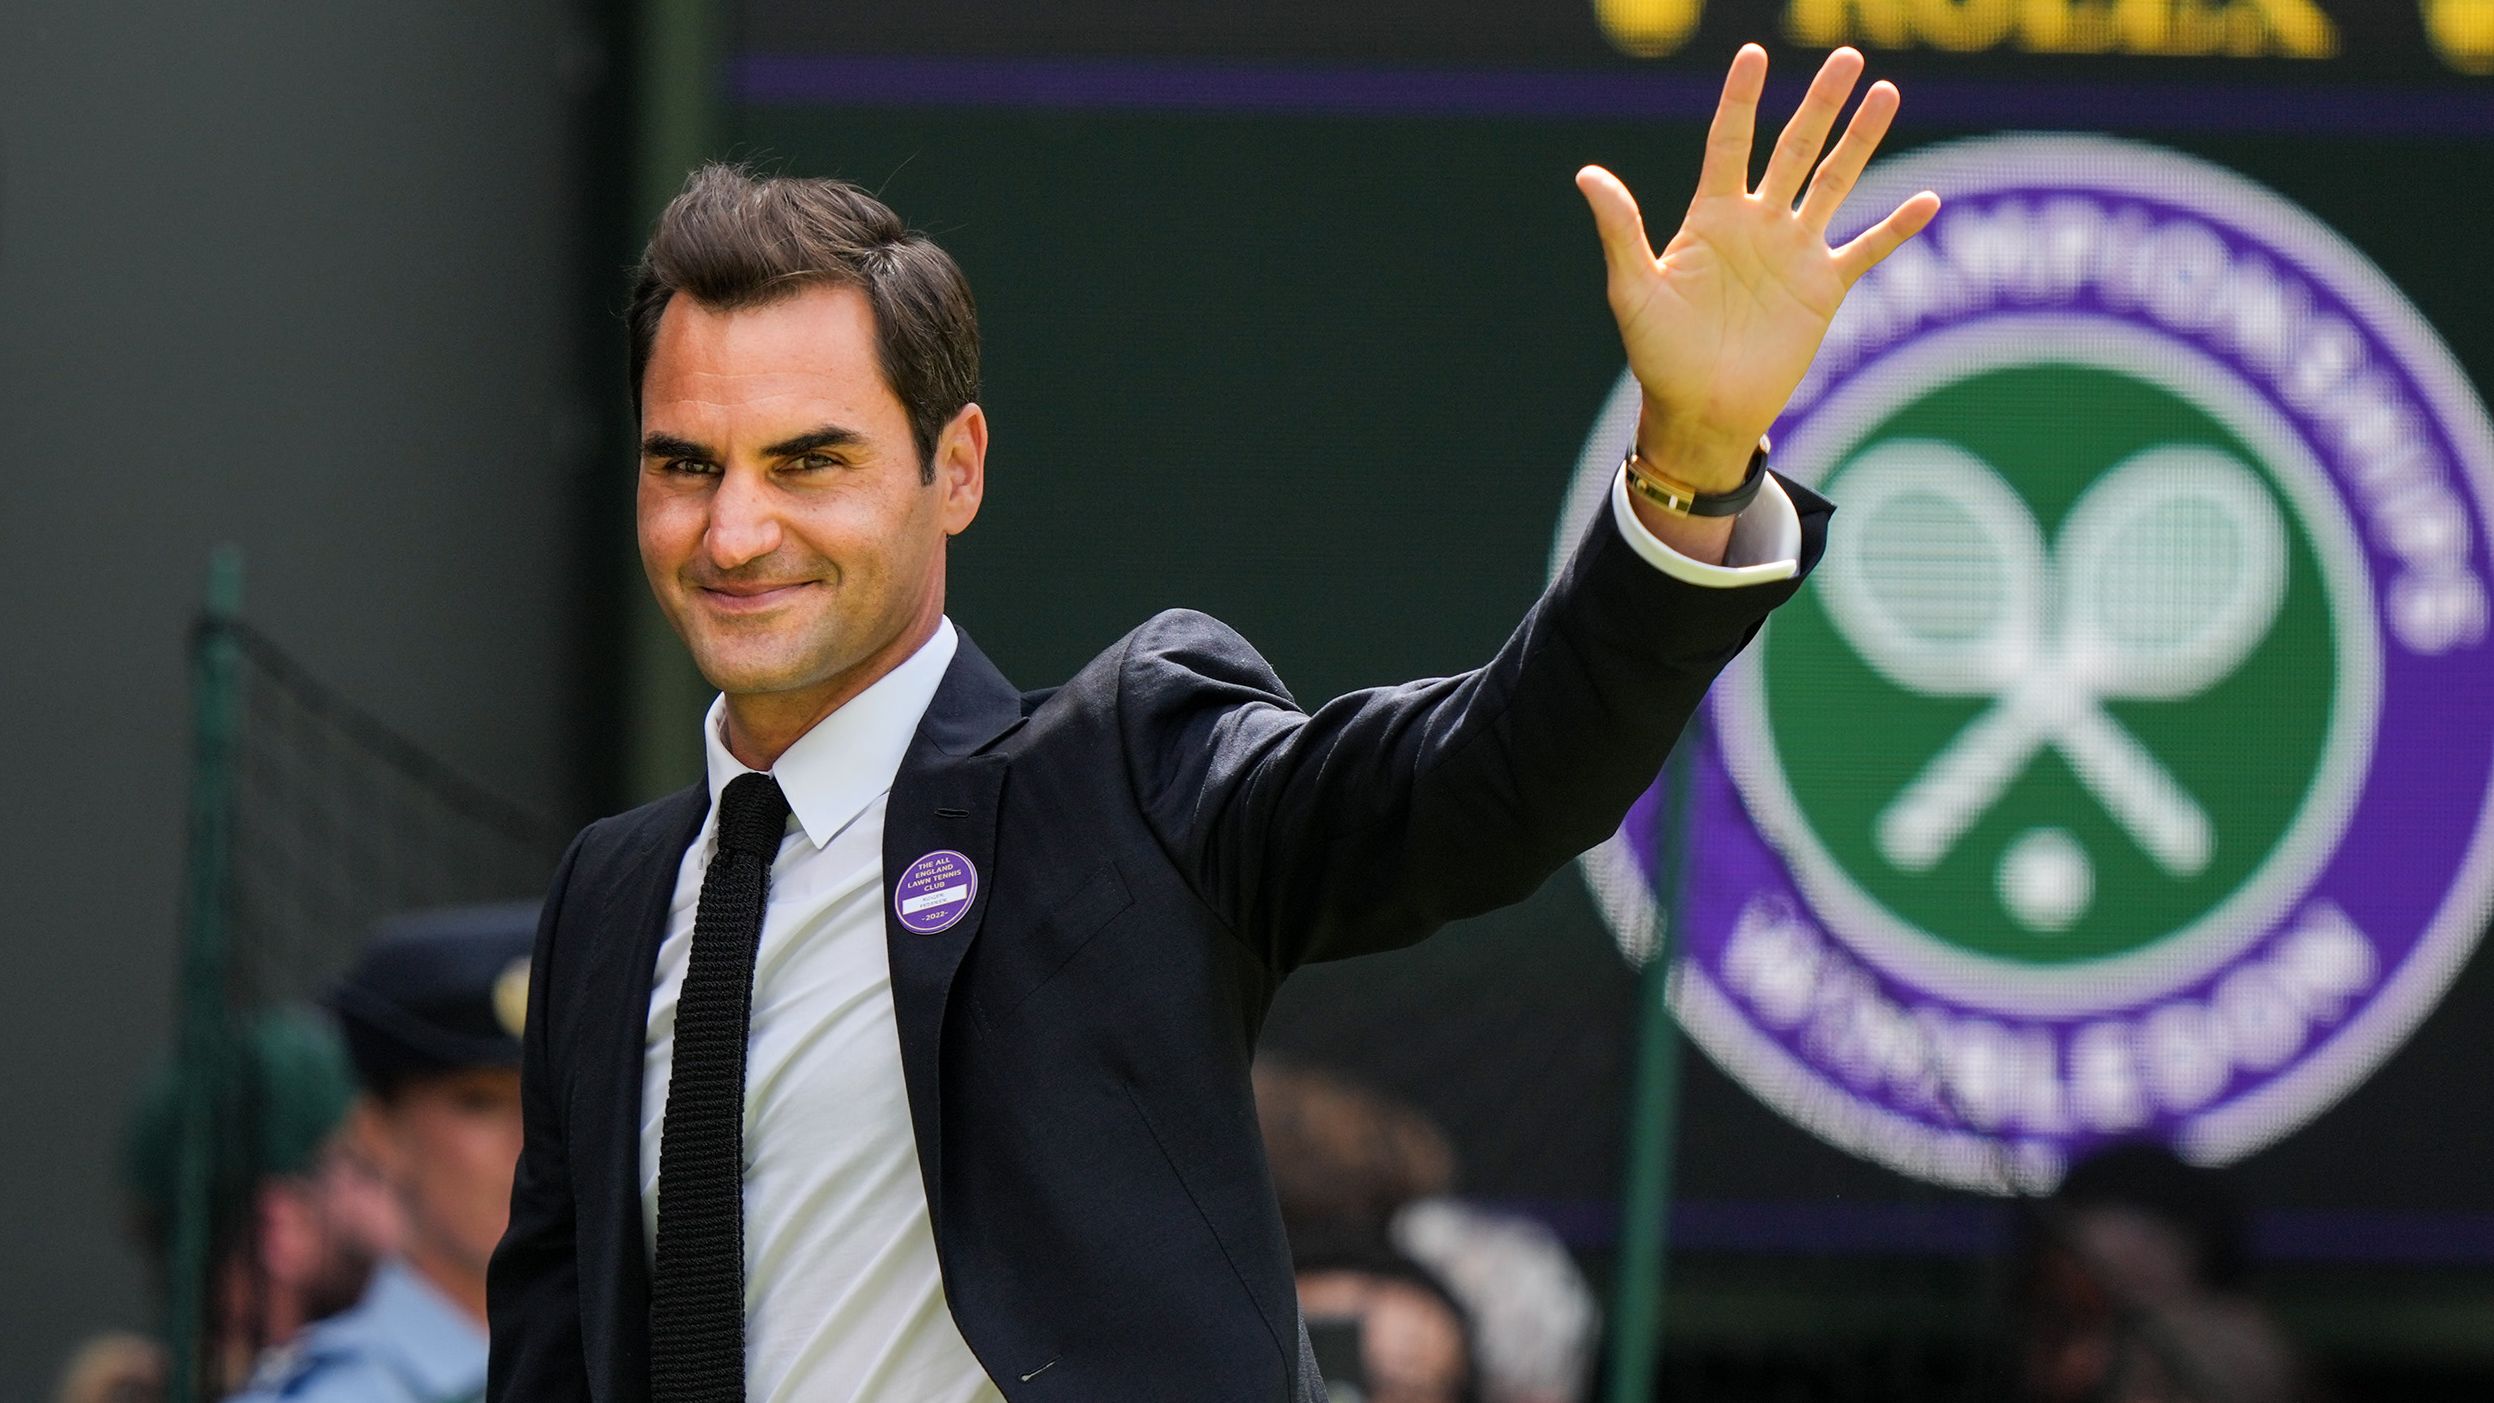 Roger Federer made an appearance at the Centre Court Centenary Celebration.